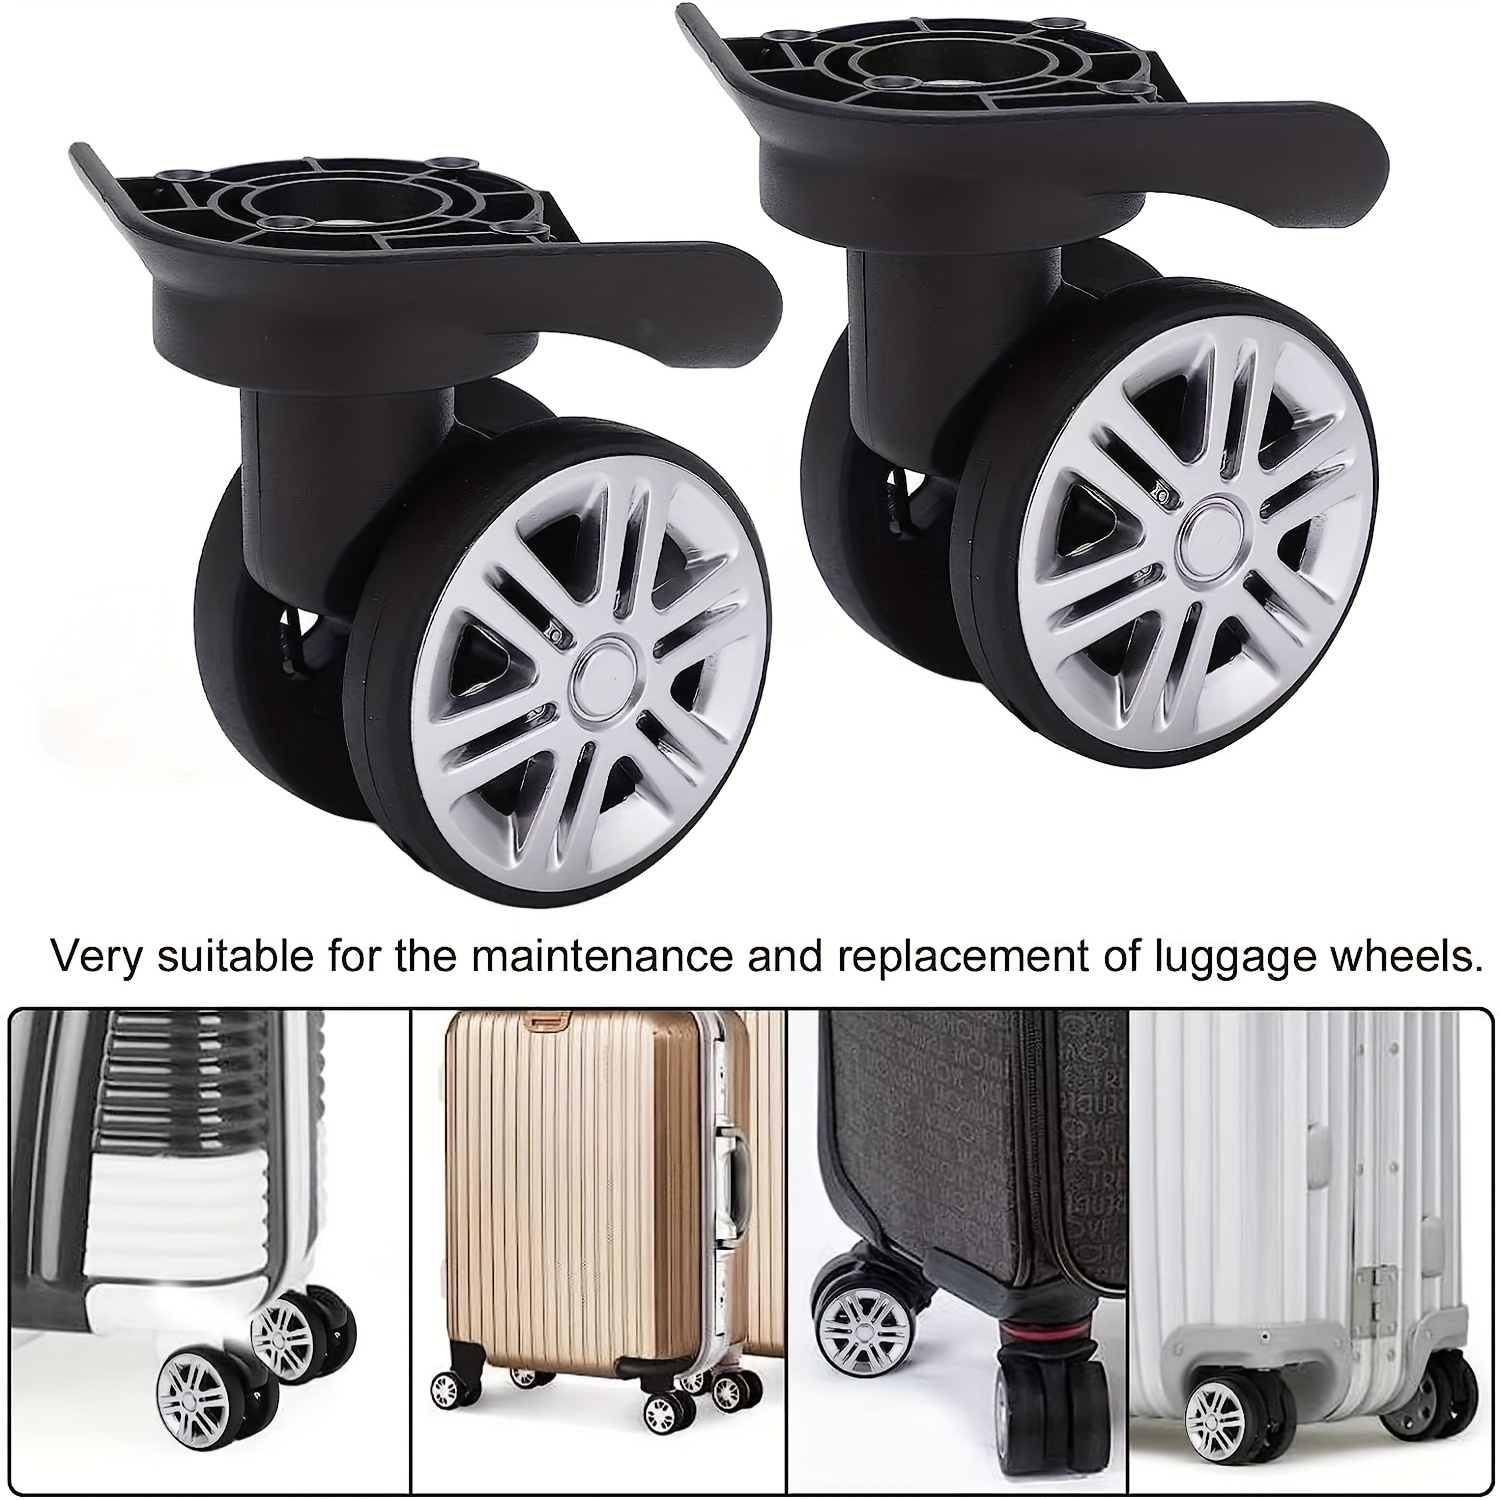 1 Pair Luggage Replacement Wheels, Luggage Wheels Replacement Double Row  Wheels, Box Bag Repair Accessories, Travel Case Wheels Replacement  Accessorie